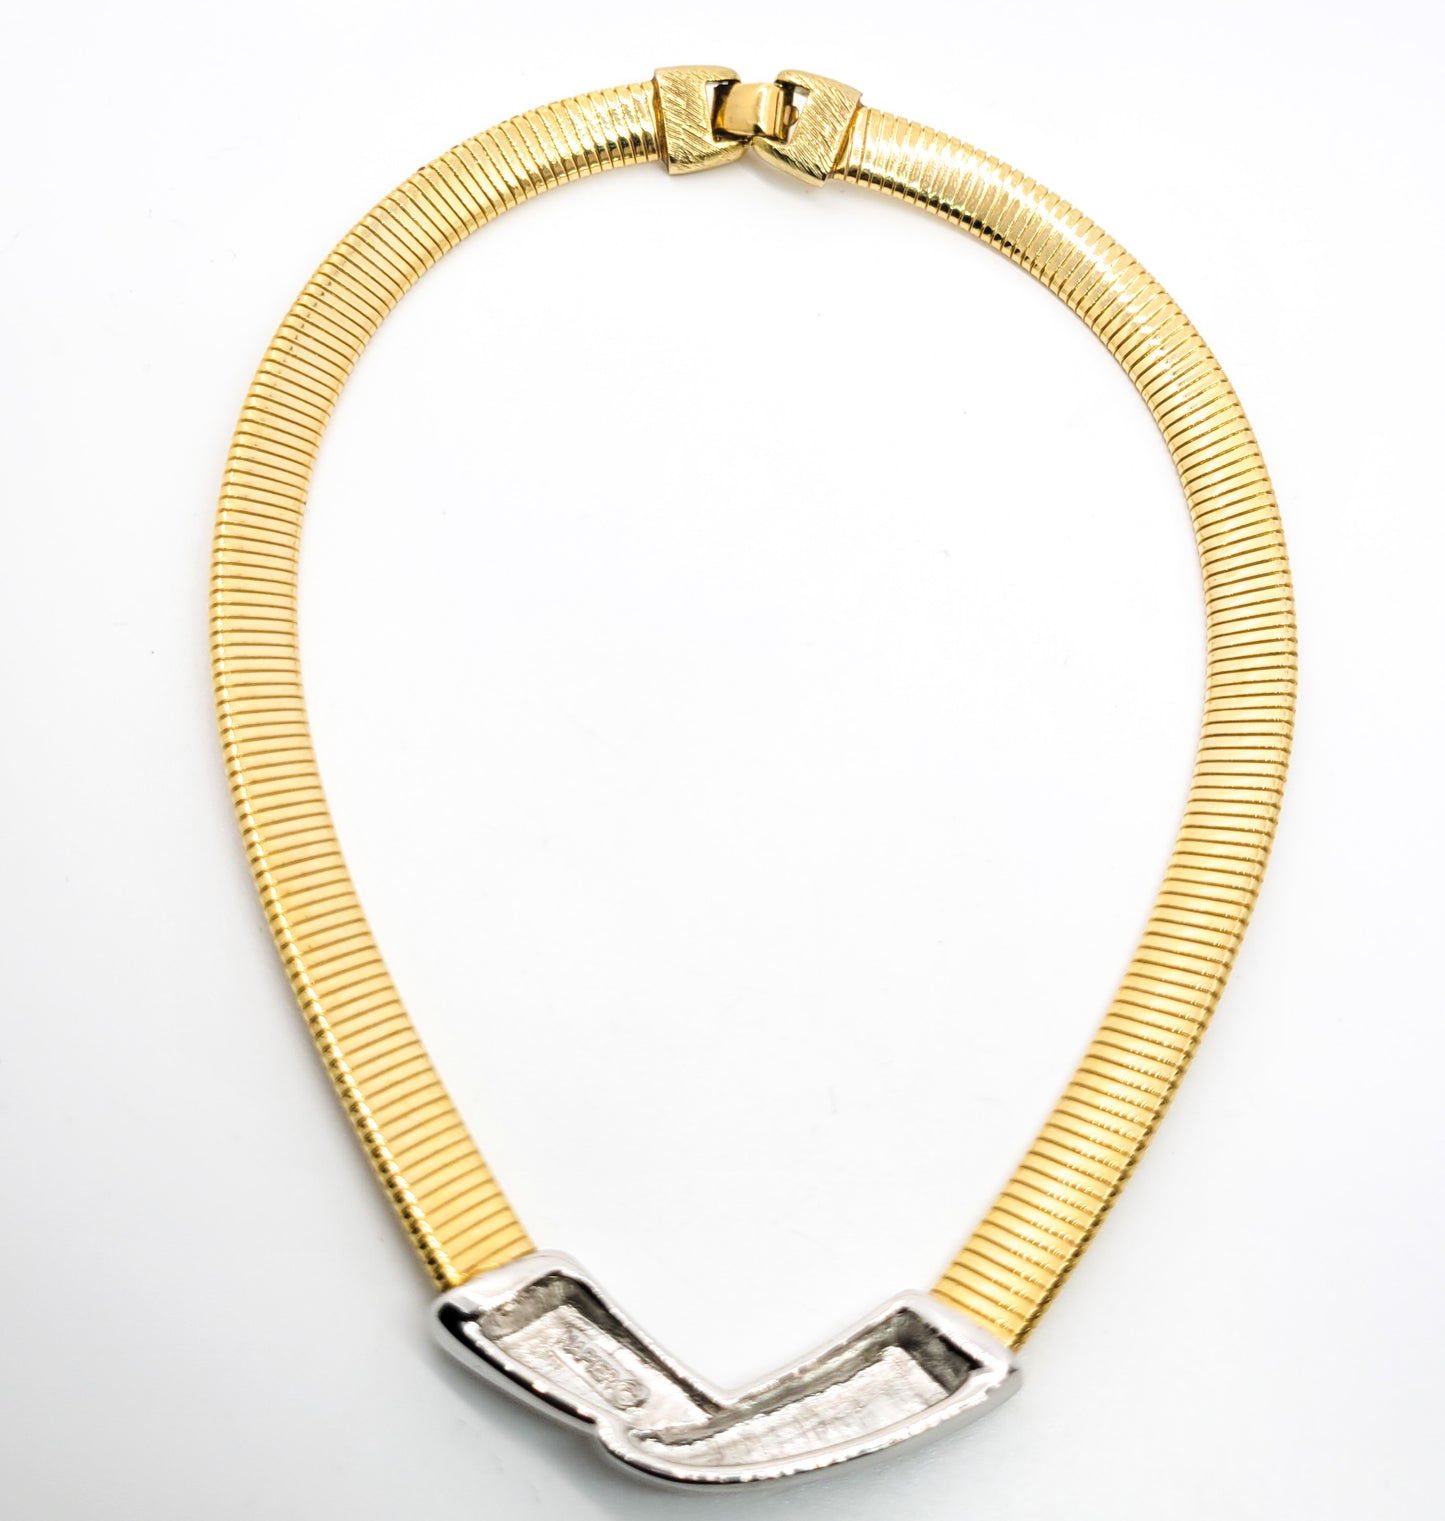 Napier Omega Gold and silver toned retro 80's vintage signed necklace